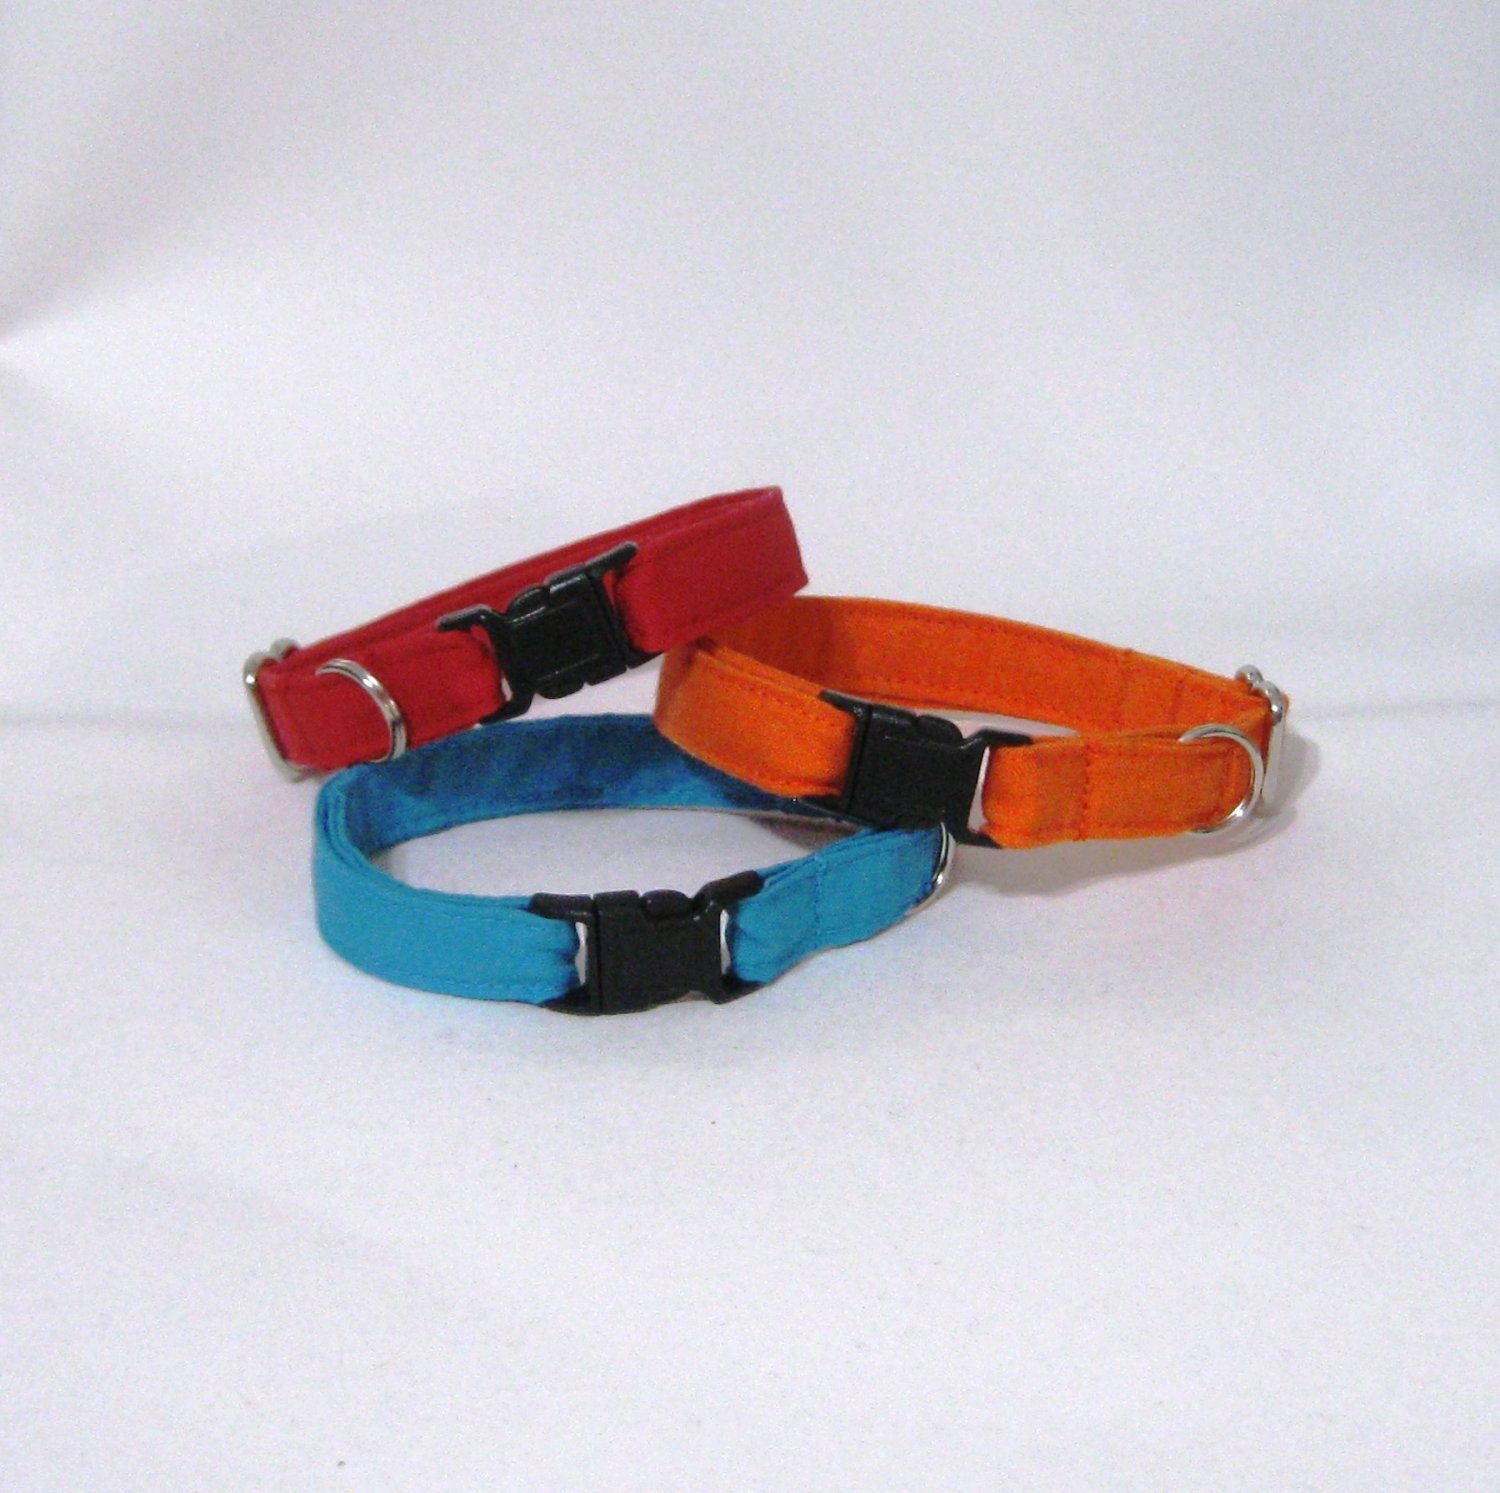 Solid Breakaway Cat Collar, Safety Collar in Cotton Fabric in Many Color Choices